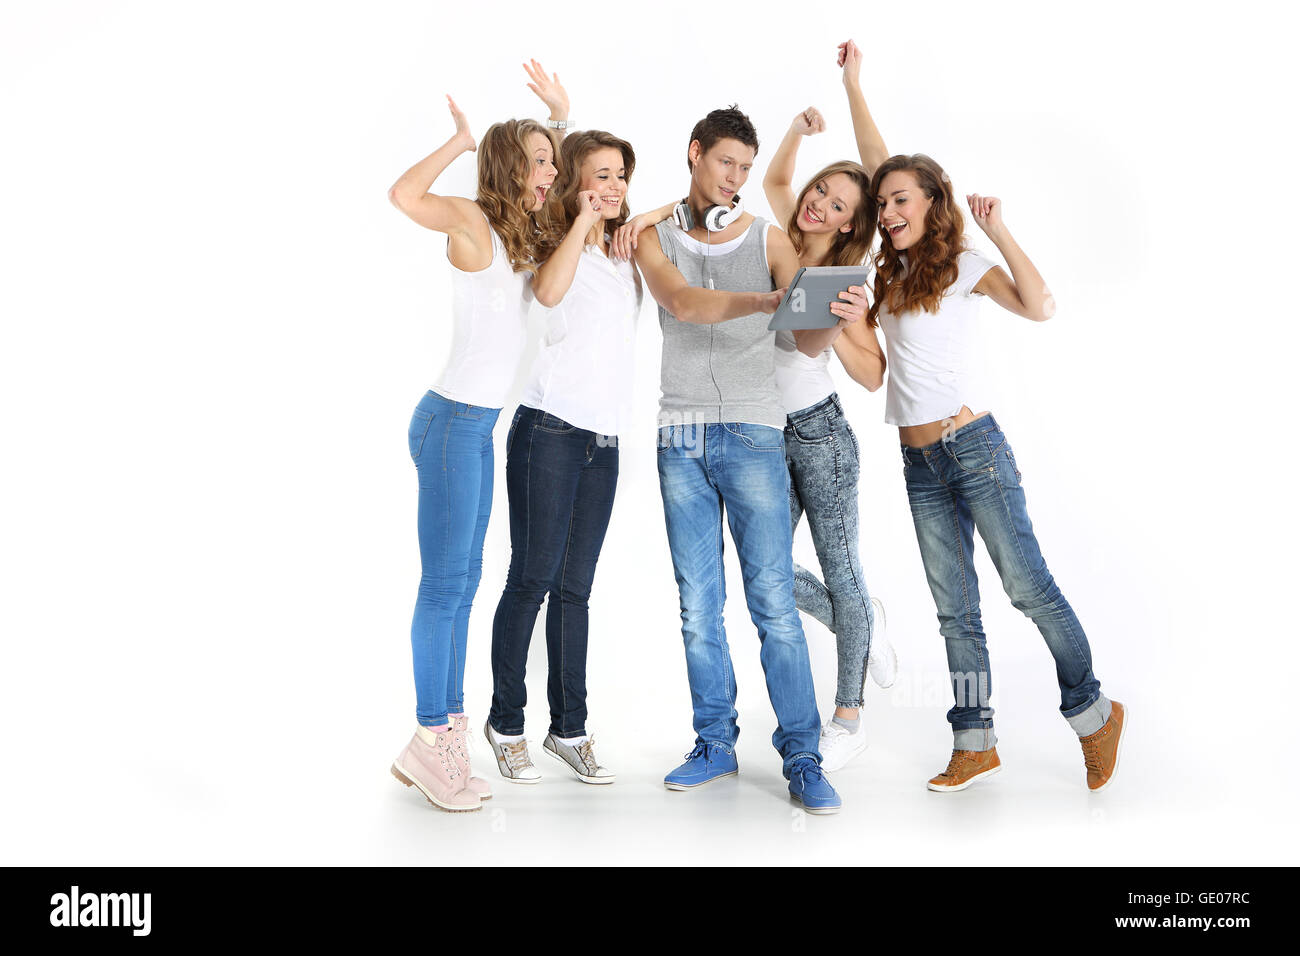 Group of young people watching the results on a digital tablet. Stock Photo